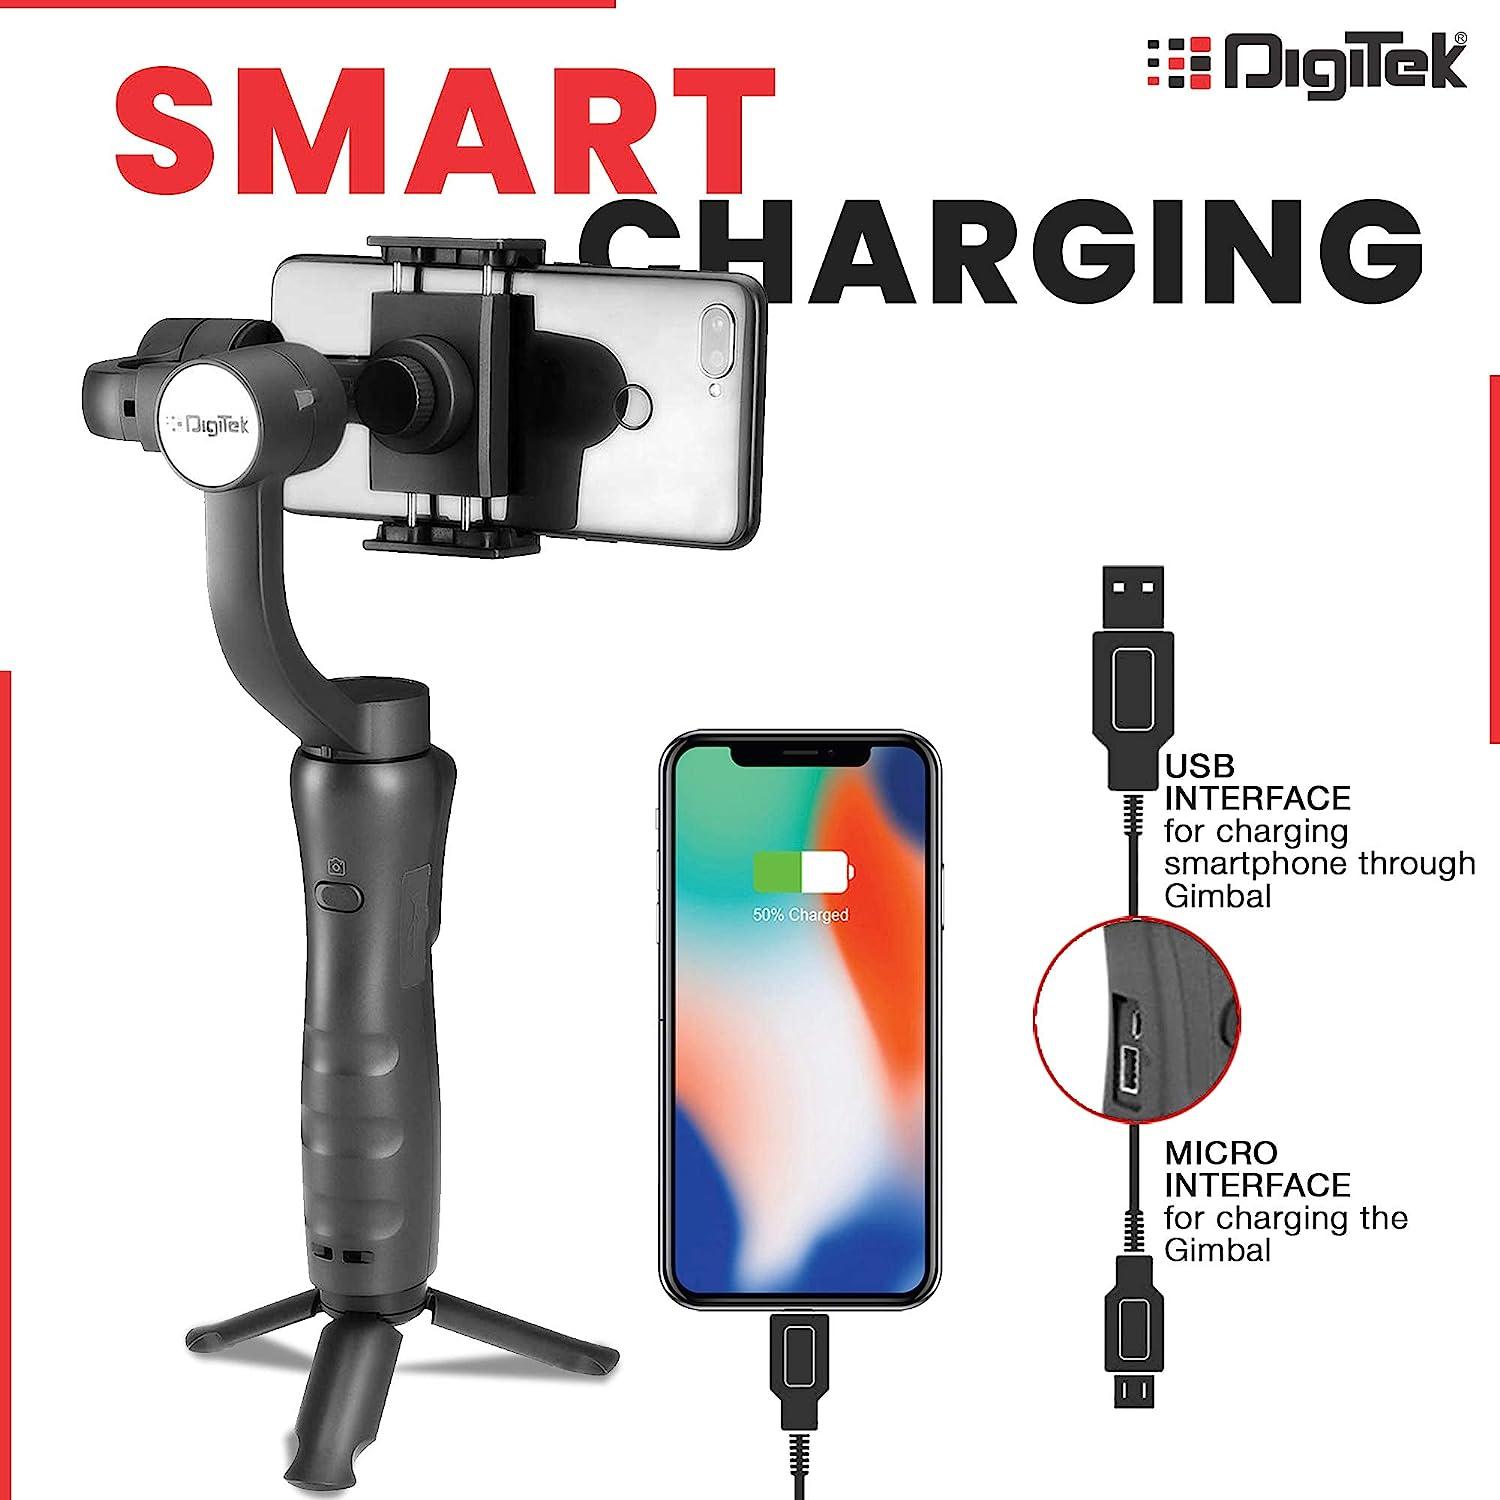 Digitek (DSG 005) 3-Axis Handheld Gimbal Stabilizer for Smartphones & Gopro with Face & Object Tracking Motion, Various Time Lapse Features & Up to 12 hrs. Operational Time DSG 005 - Digitek